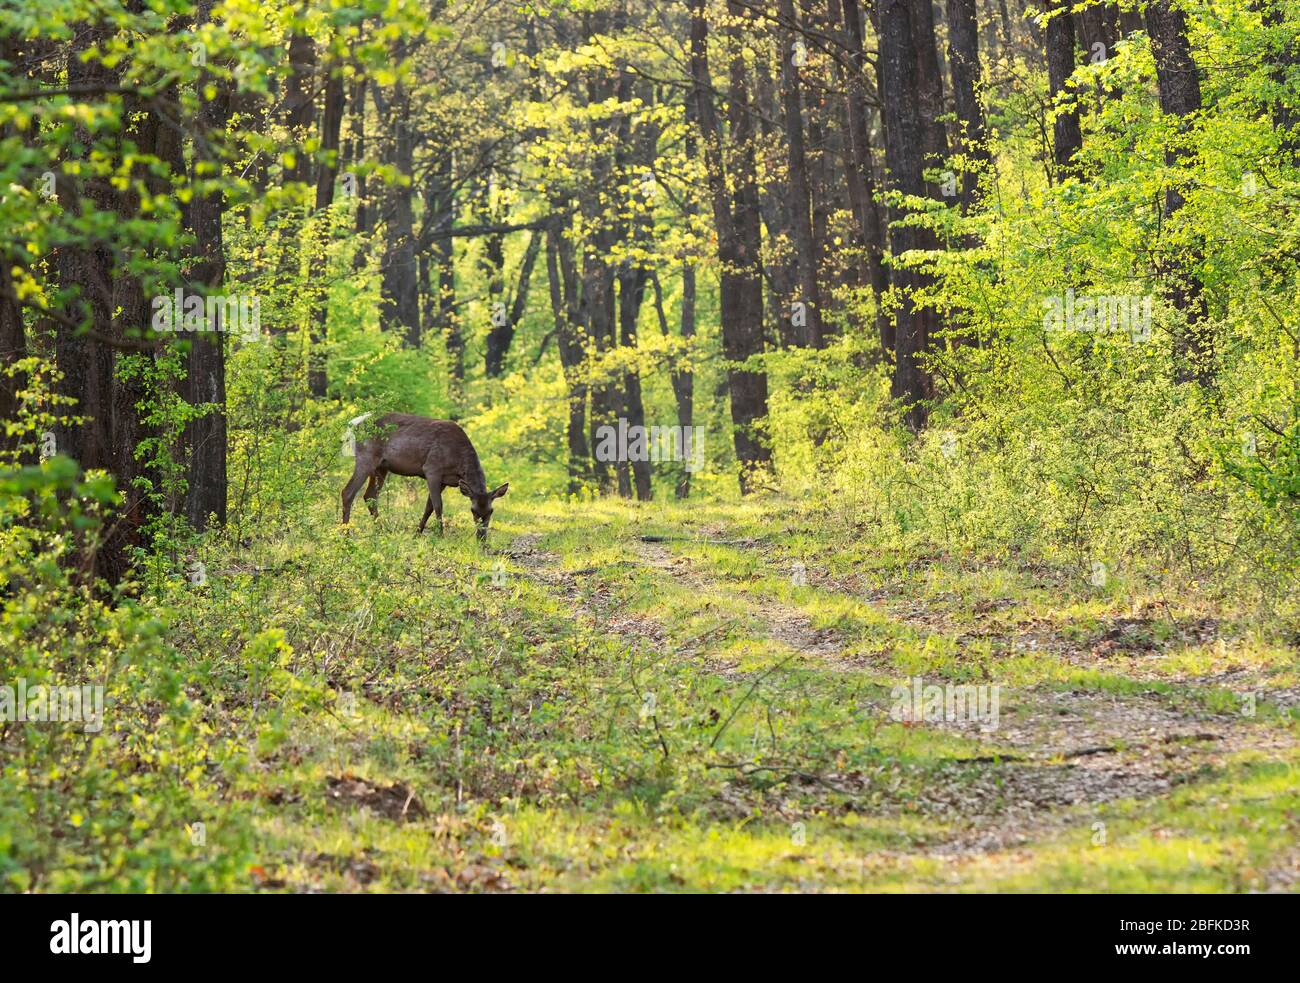 Deer in spring forest Stock Photo